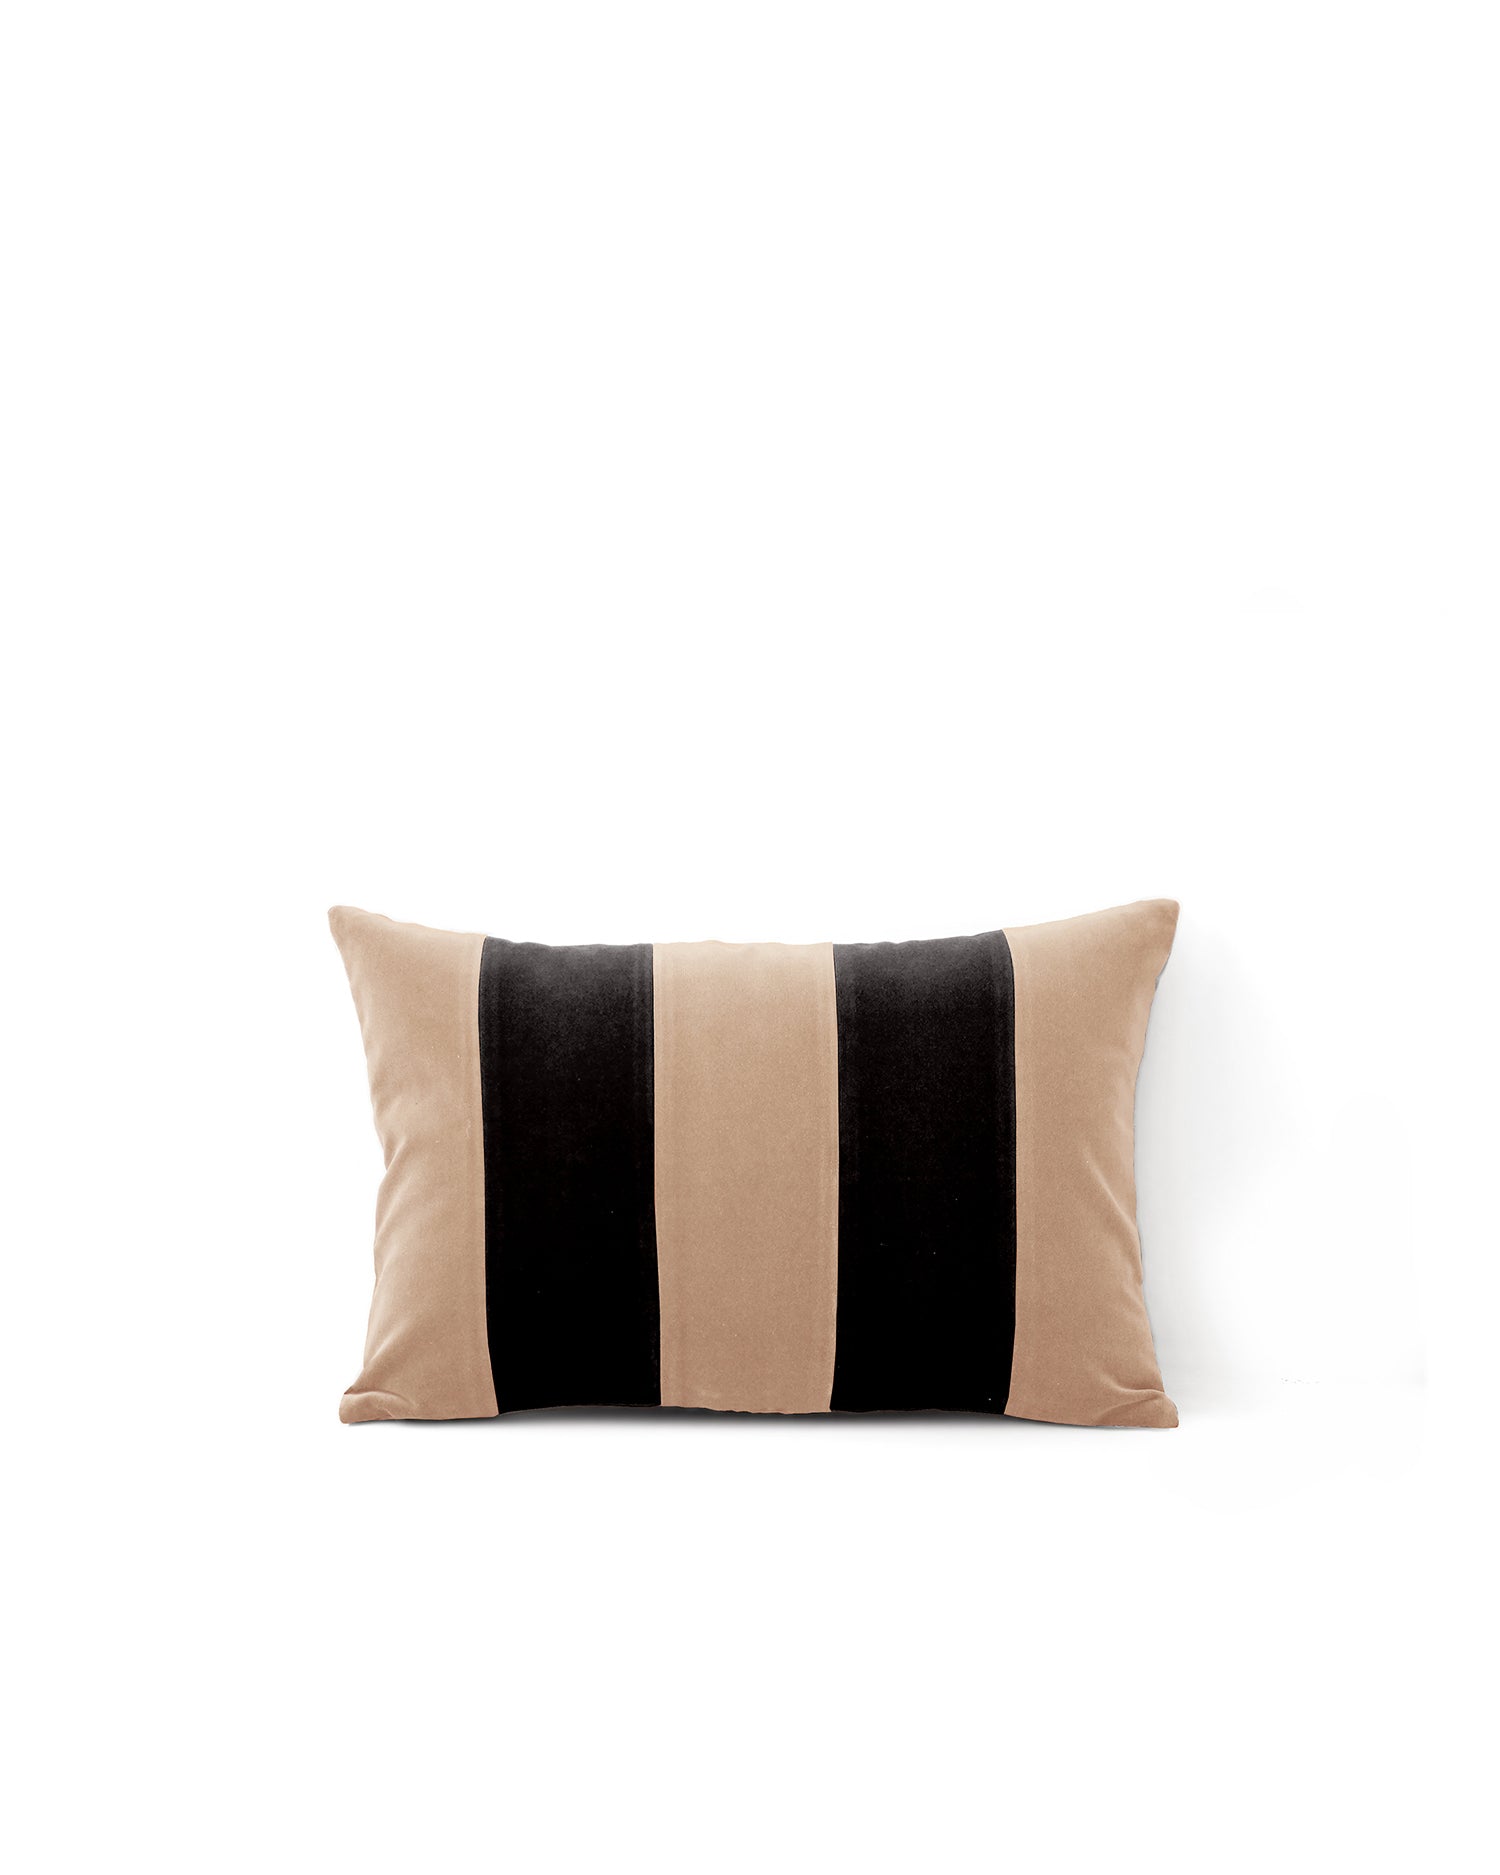 Luxury Velvet Pillow handmade with cotton velvet by My Friend Paco home accessories